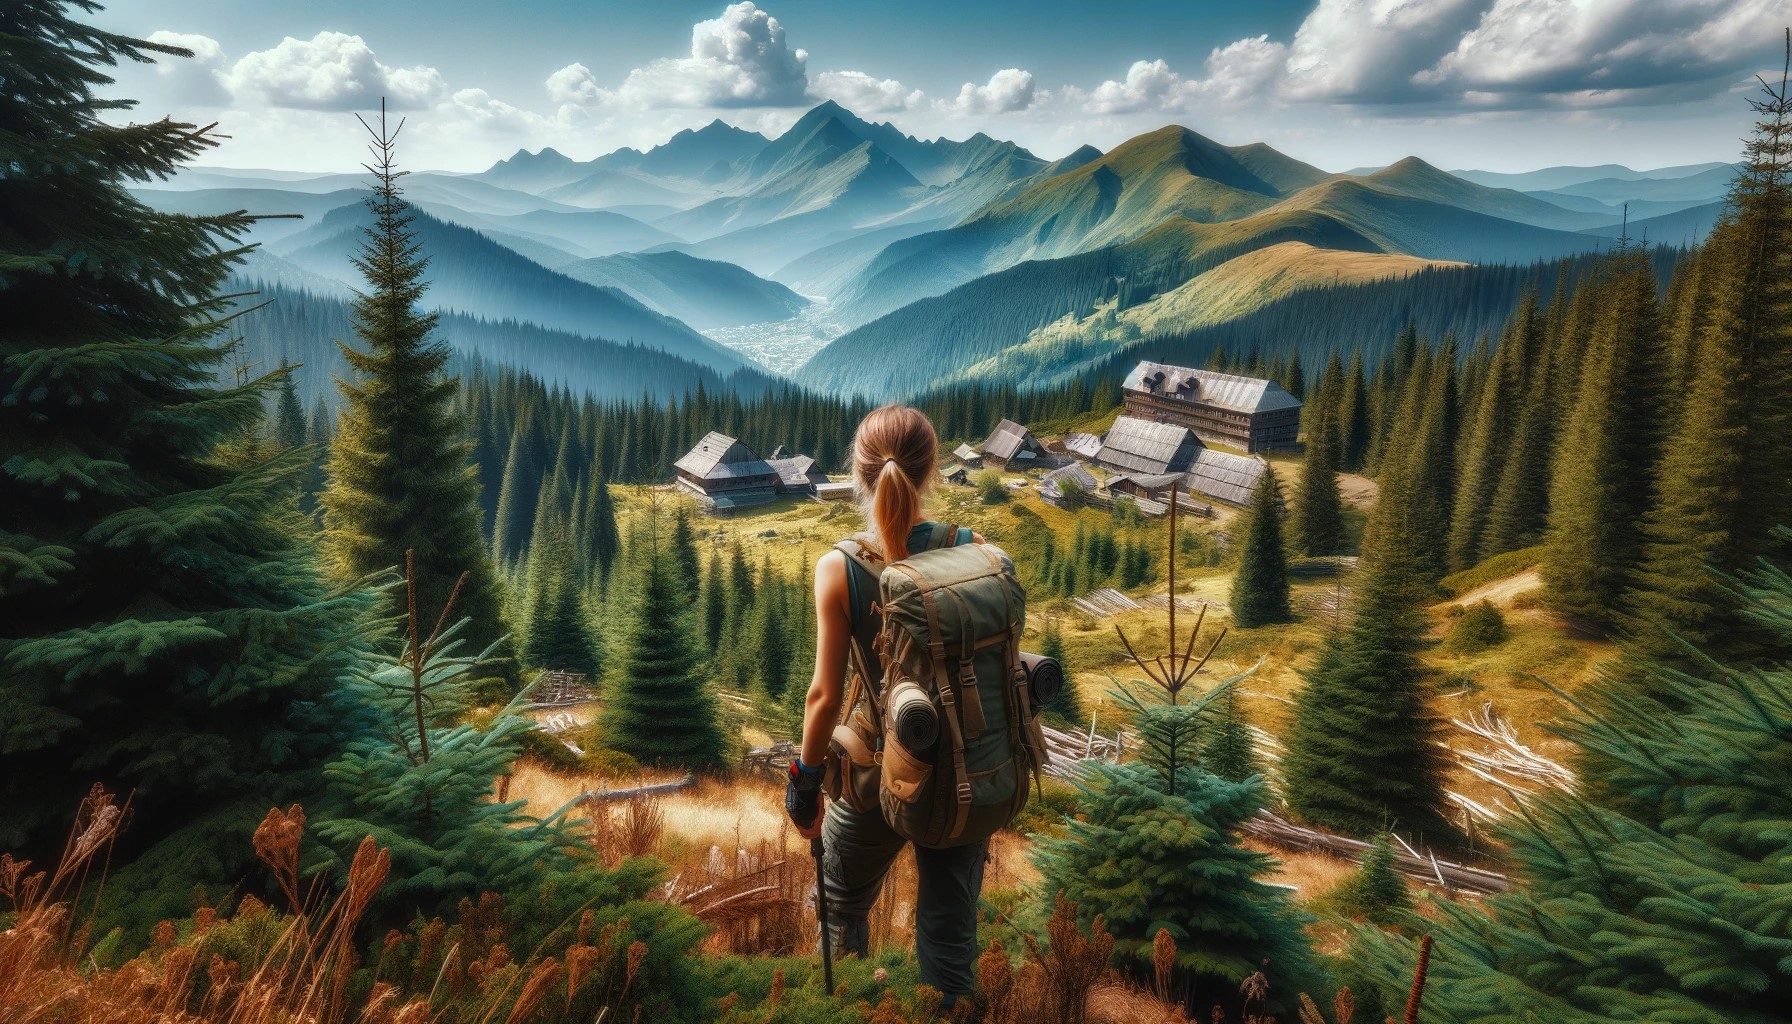 A captivating scene in the Carpathian Mountains with a female hiker in the foreground. She is admiring the expansive views of the mountain range, surr